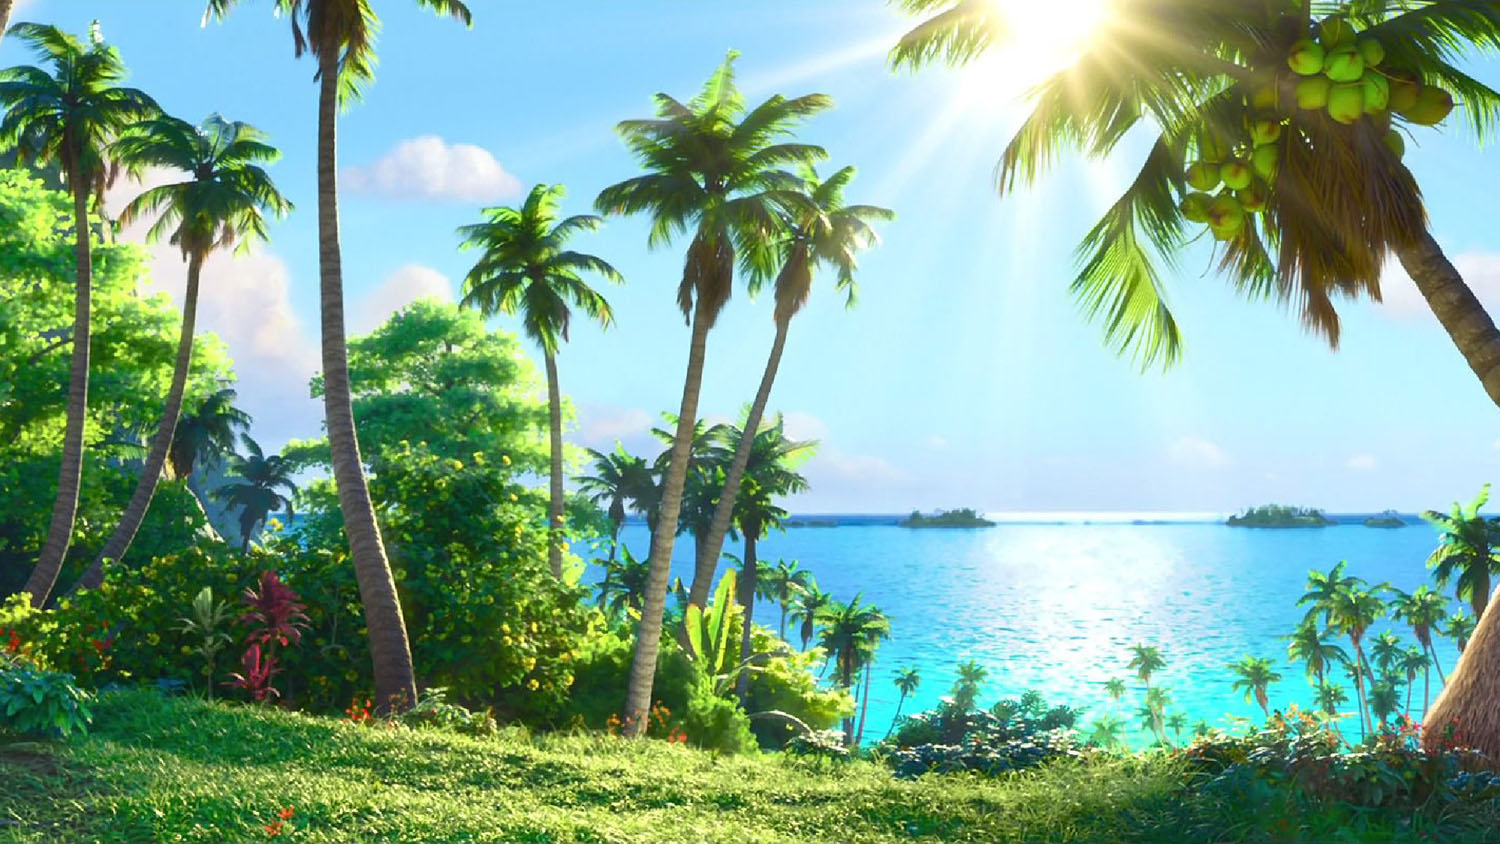 MOANA film still of palm trees and the ocean